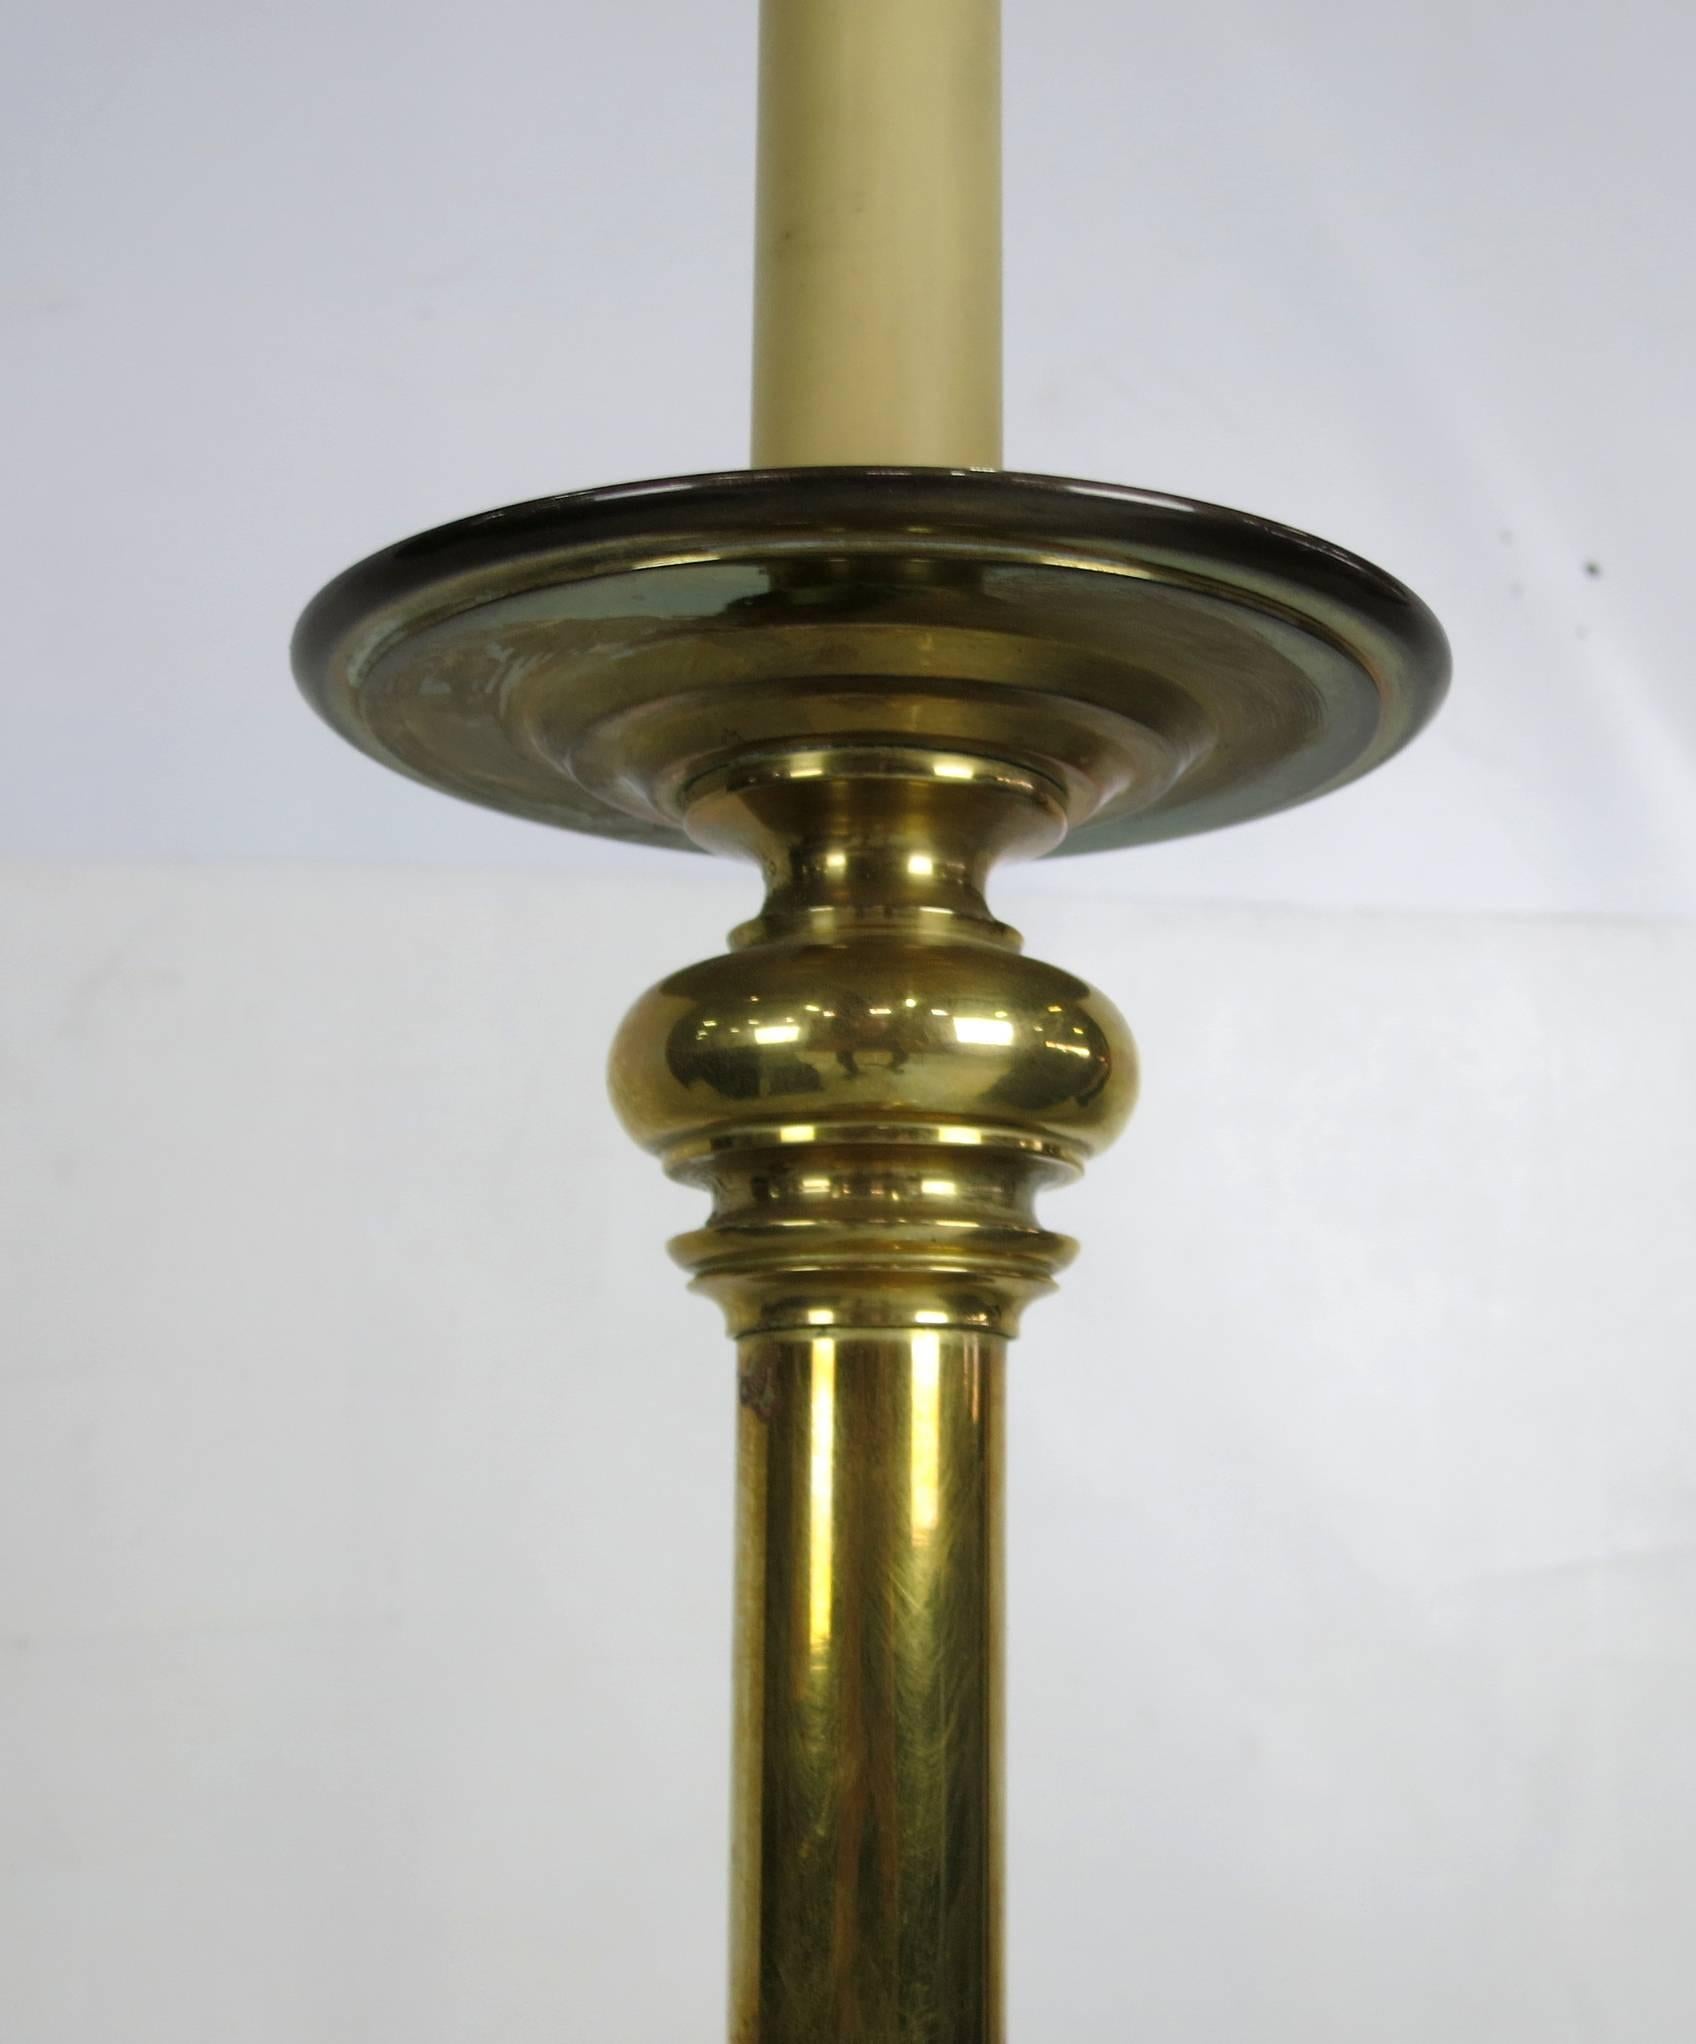 Pair of Brass Candlestick Lamps by Paul Hanson In Good Condition For Sale In Danville, CA